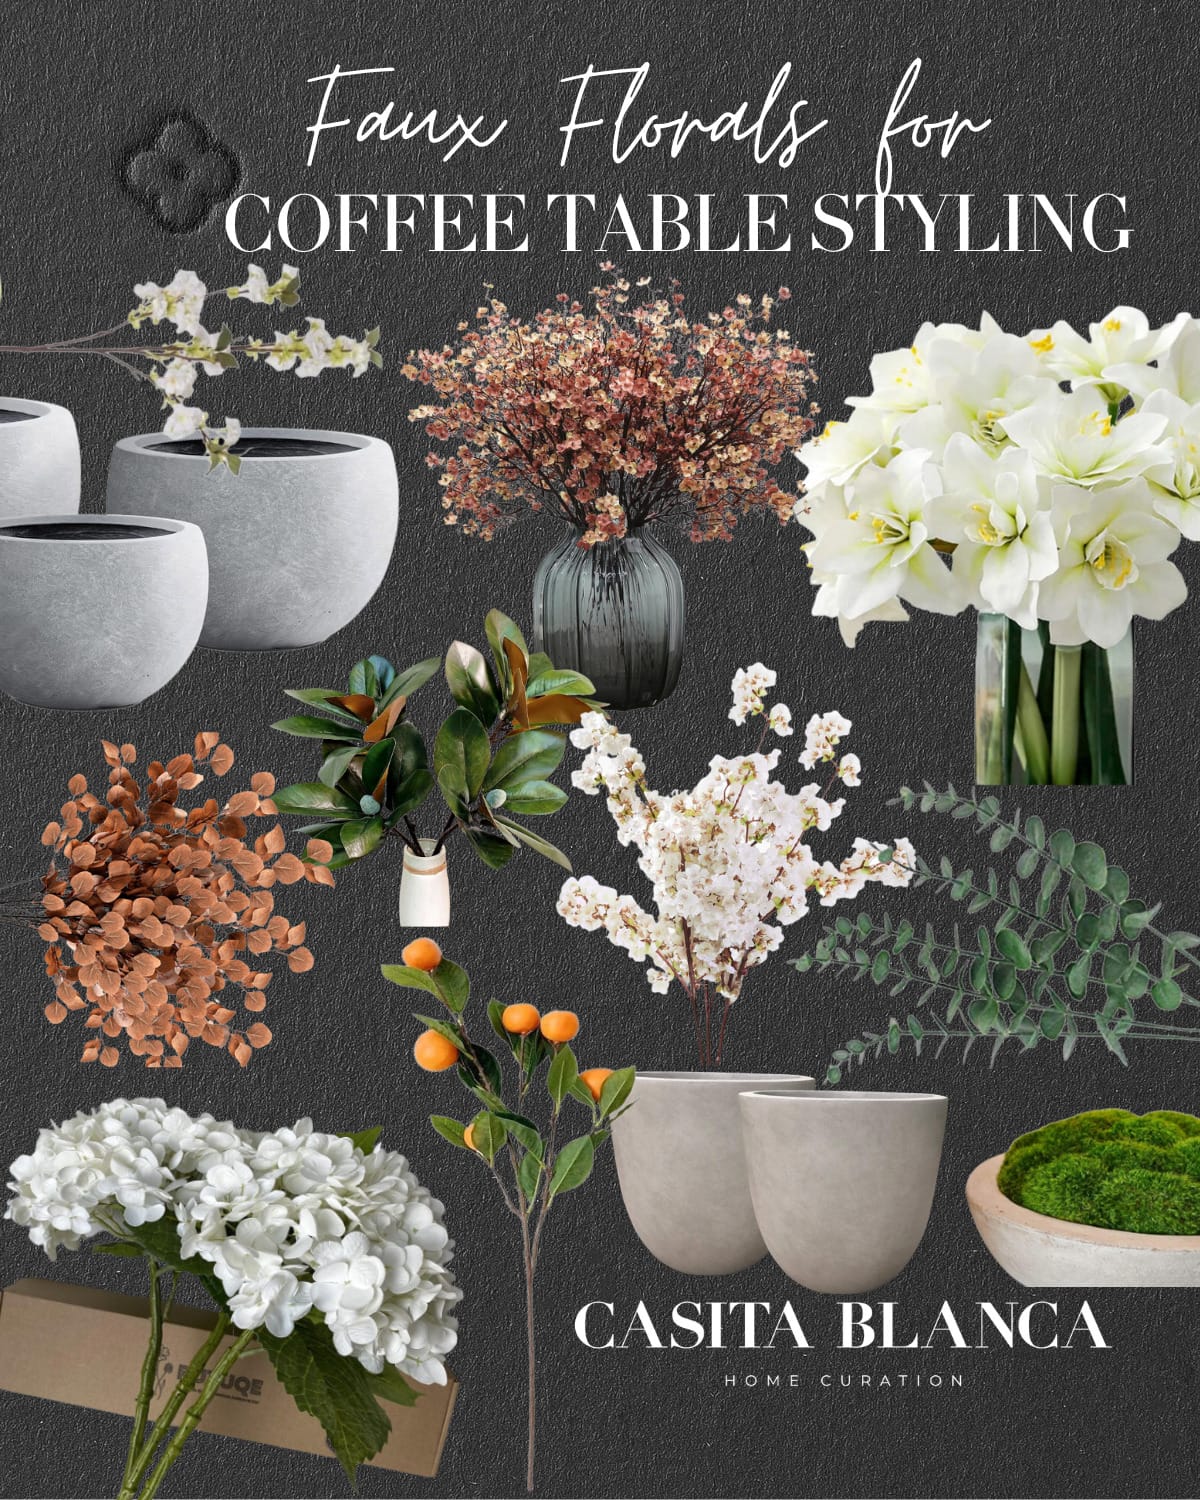 Coffee Table Styling | Fall Edition | #coffeetable #styling #fall #edition #fauxfloral #flowers #flowerarrangement #vase #planter #moss #autumn #fall